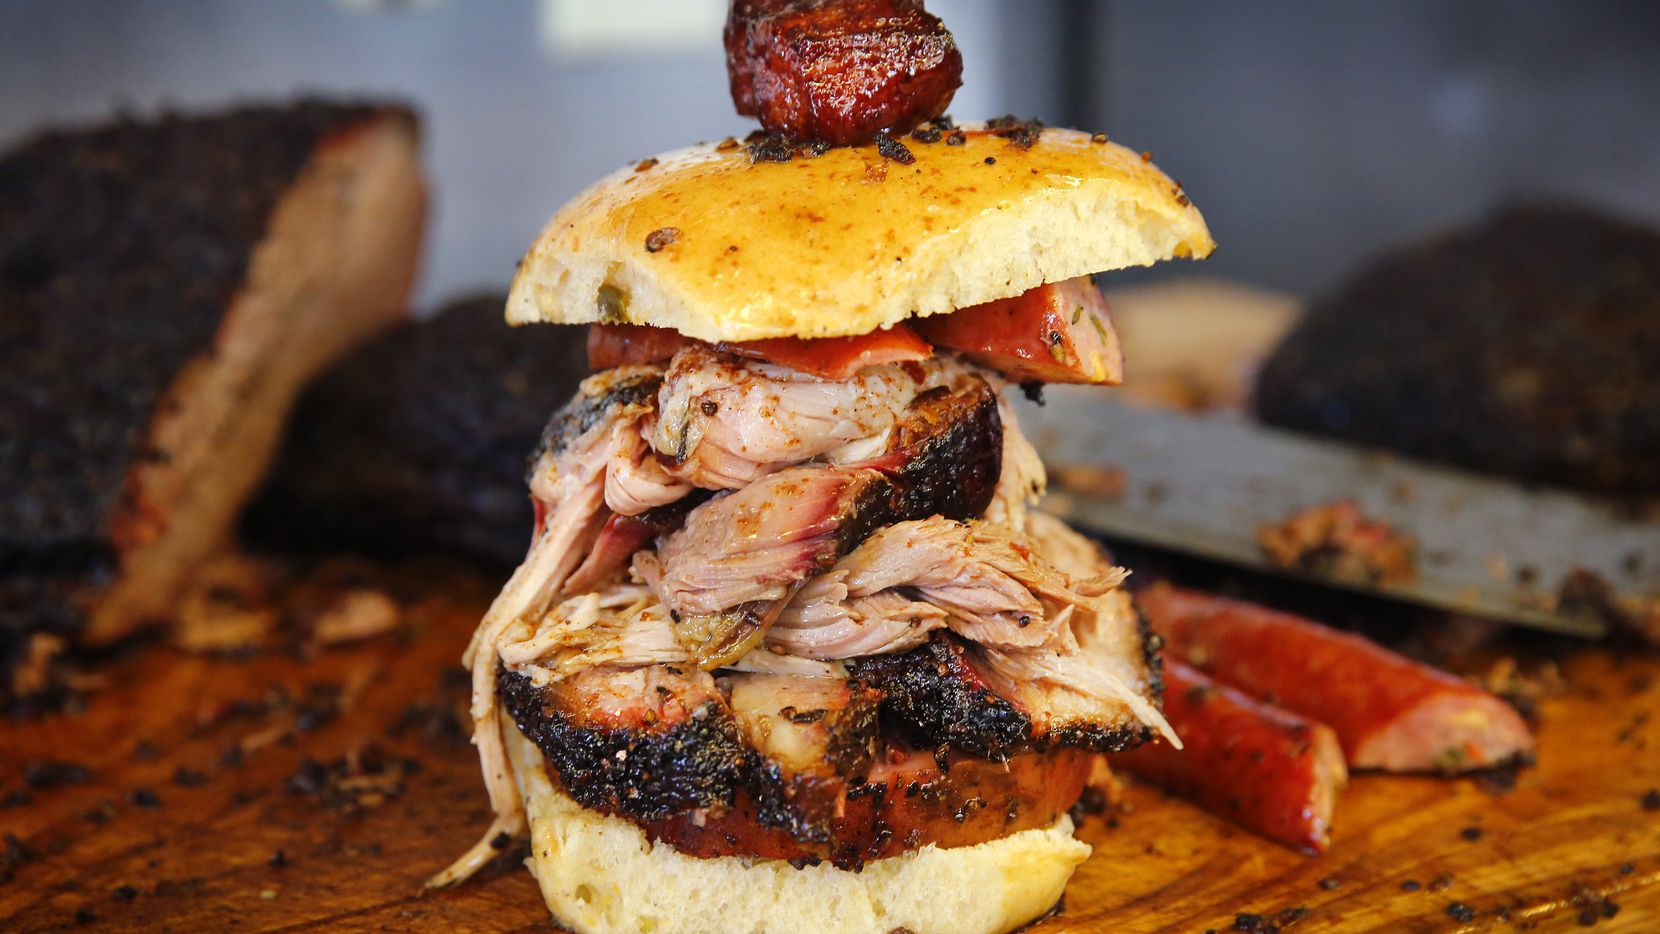 Panther City BBQ co-pitmasters Ernie Morales and Chris Magallanes make a killer Southside Slammer sandwich: smoked bologna, brisket, pulled pork, jalapeño cheese sausage and topped with pork belly.